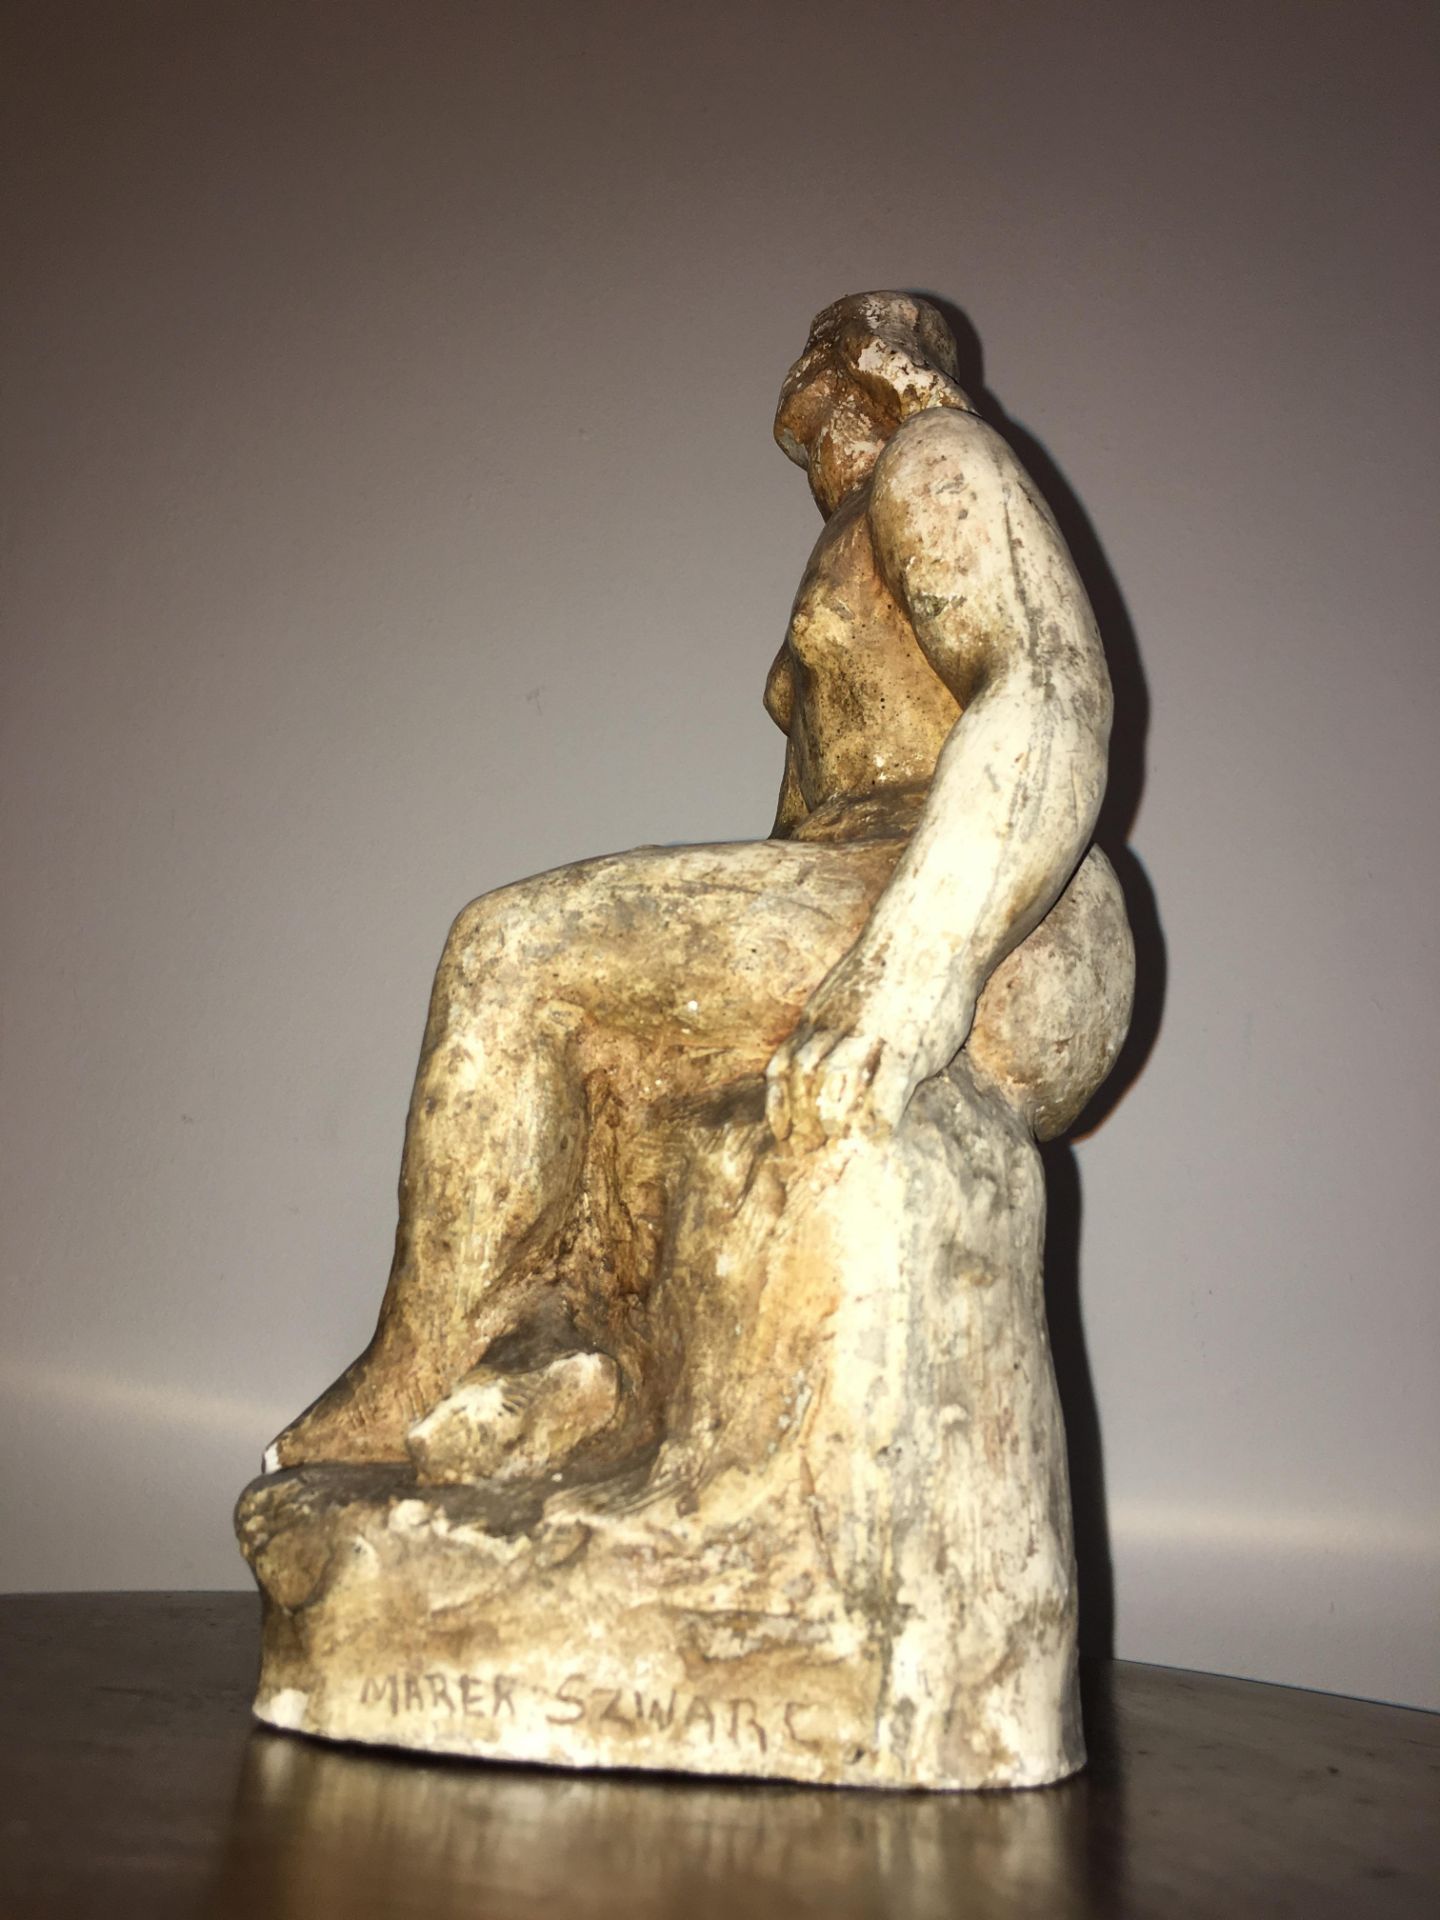 Seated female plaster sculpture signed by Marek Szwarc 1892-1958 - Image 3 of 7